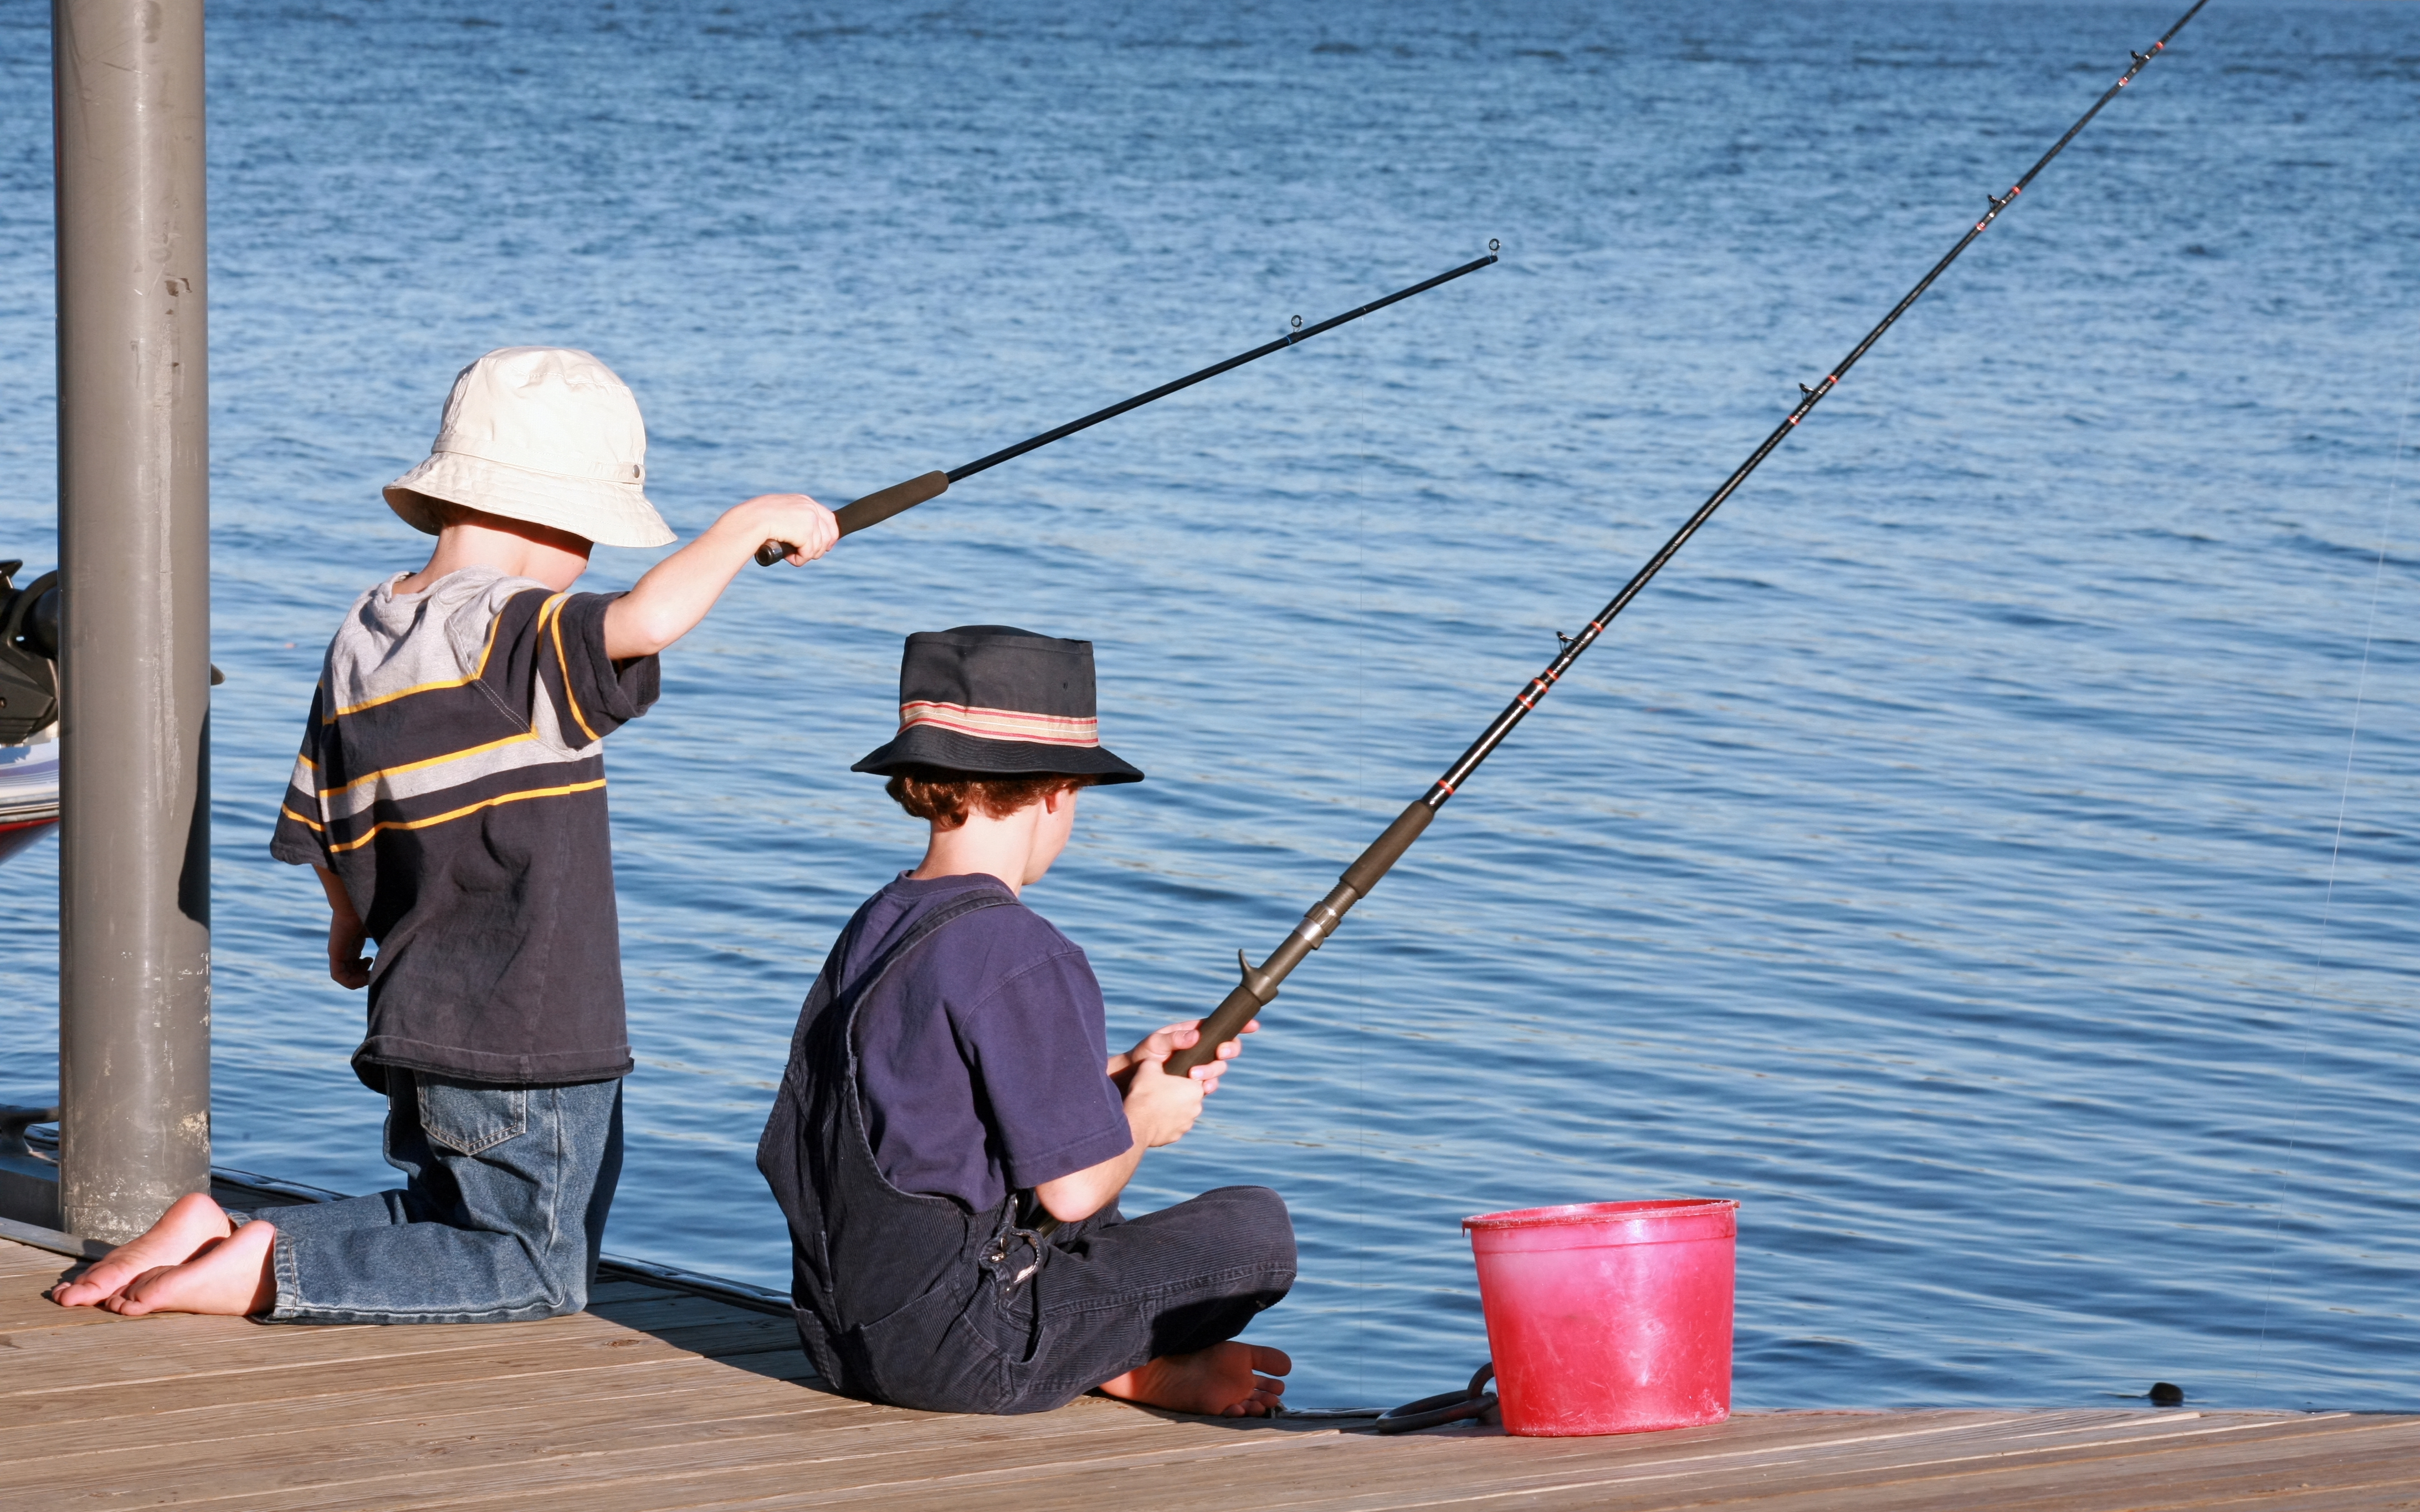 Two young boys fishing off a pier | Source: Shutterstock